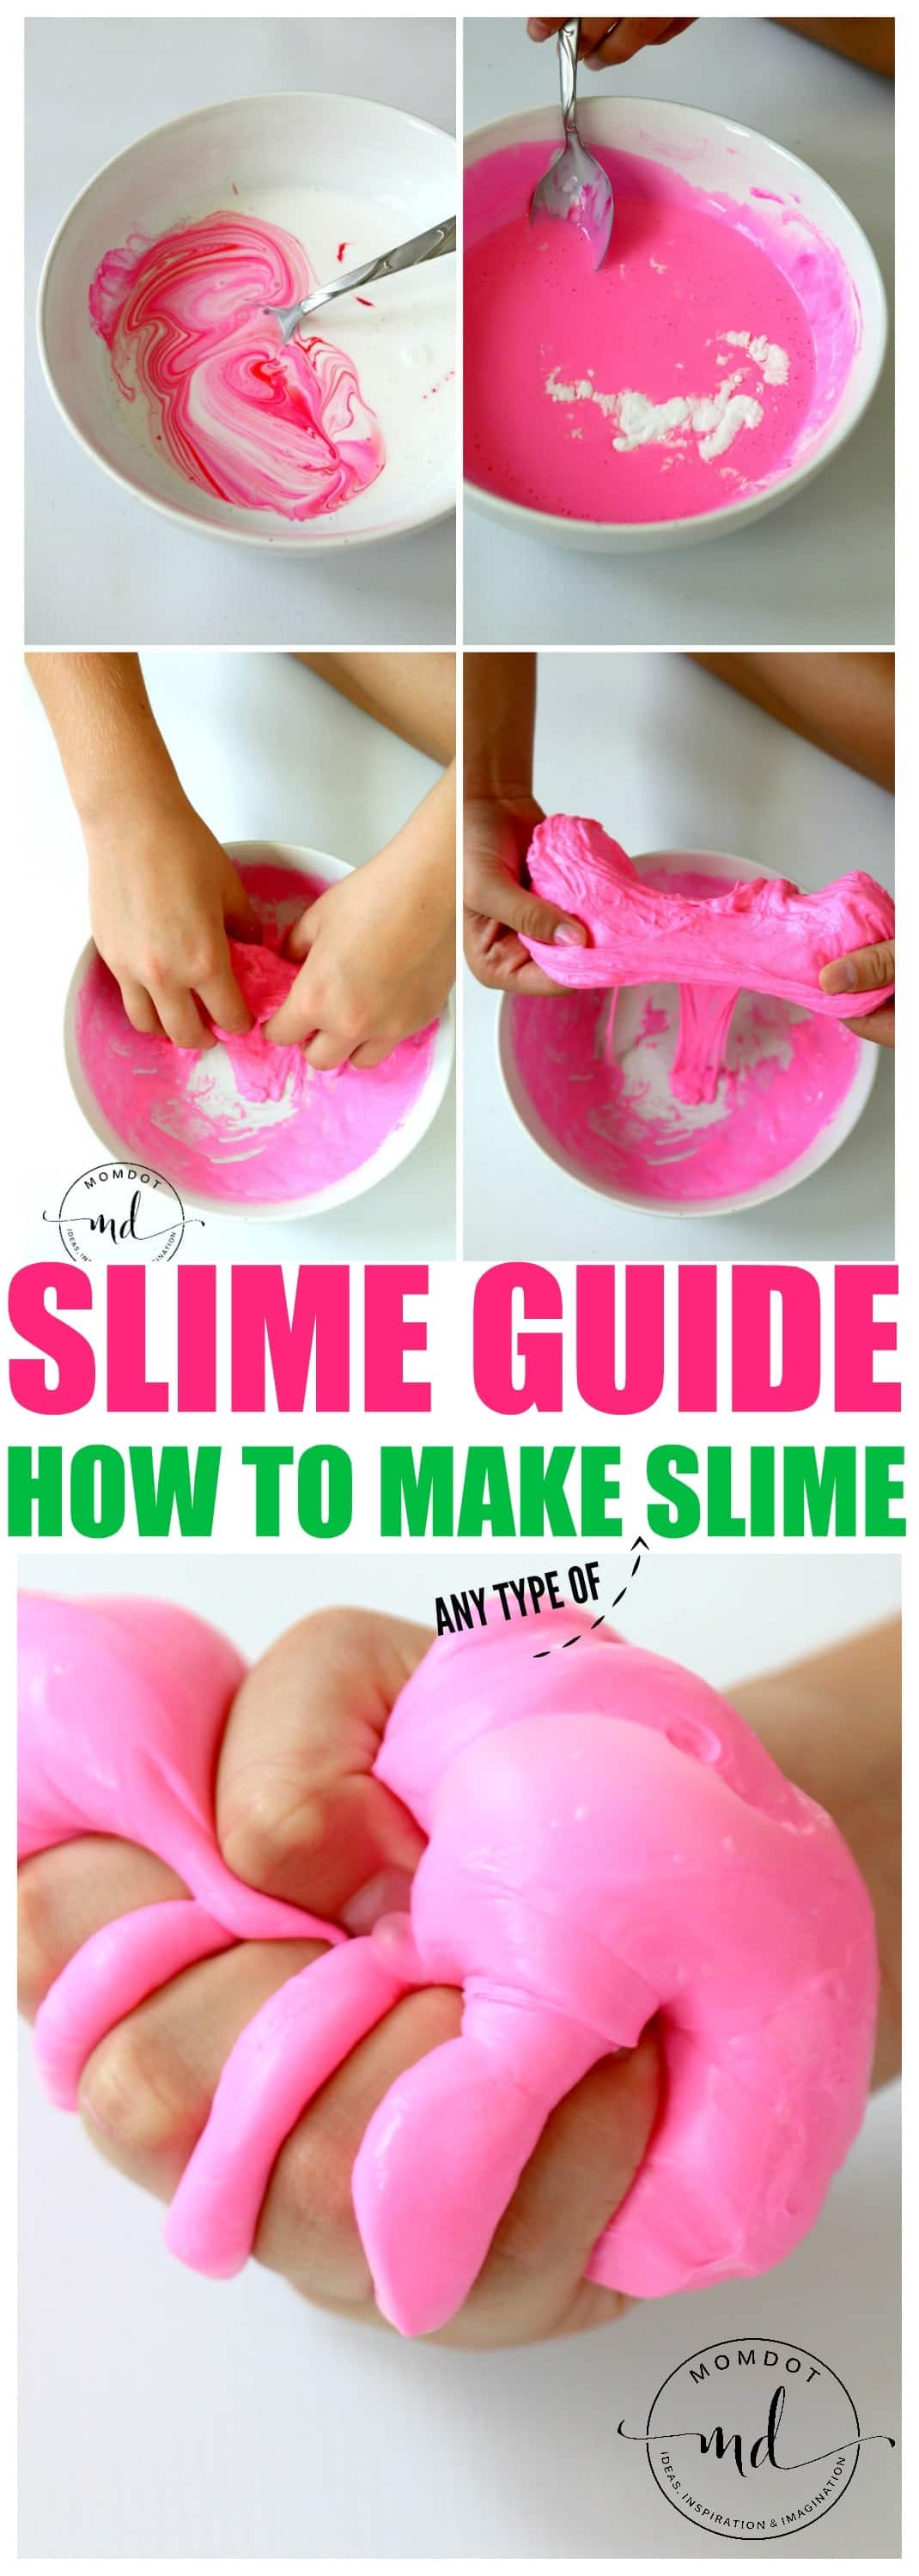 How to make Slime, a slime guide on how to make slime with saline solution, how to make slime with starch and how slime works